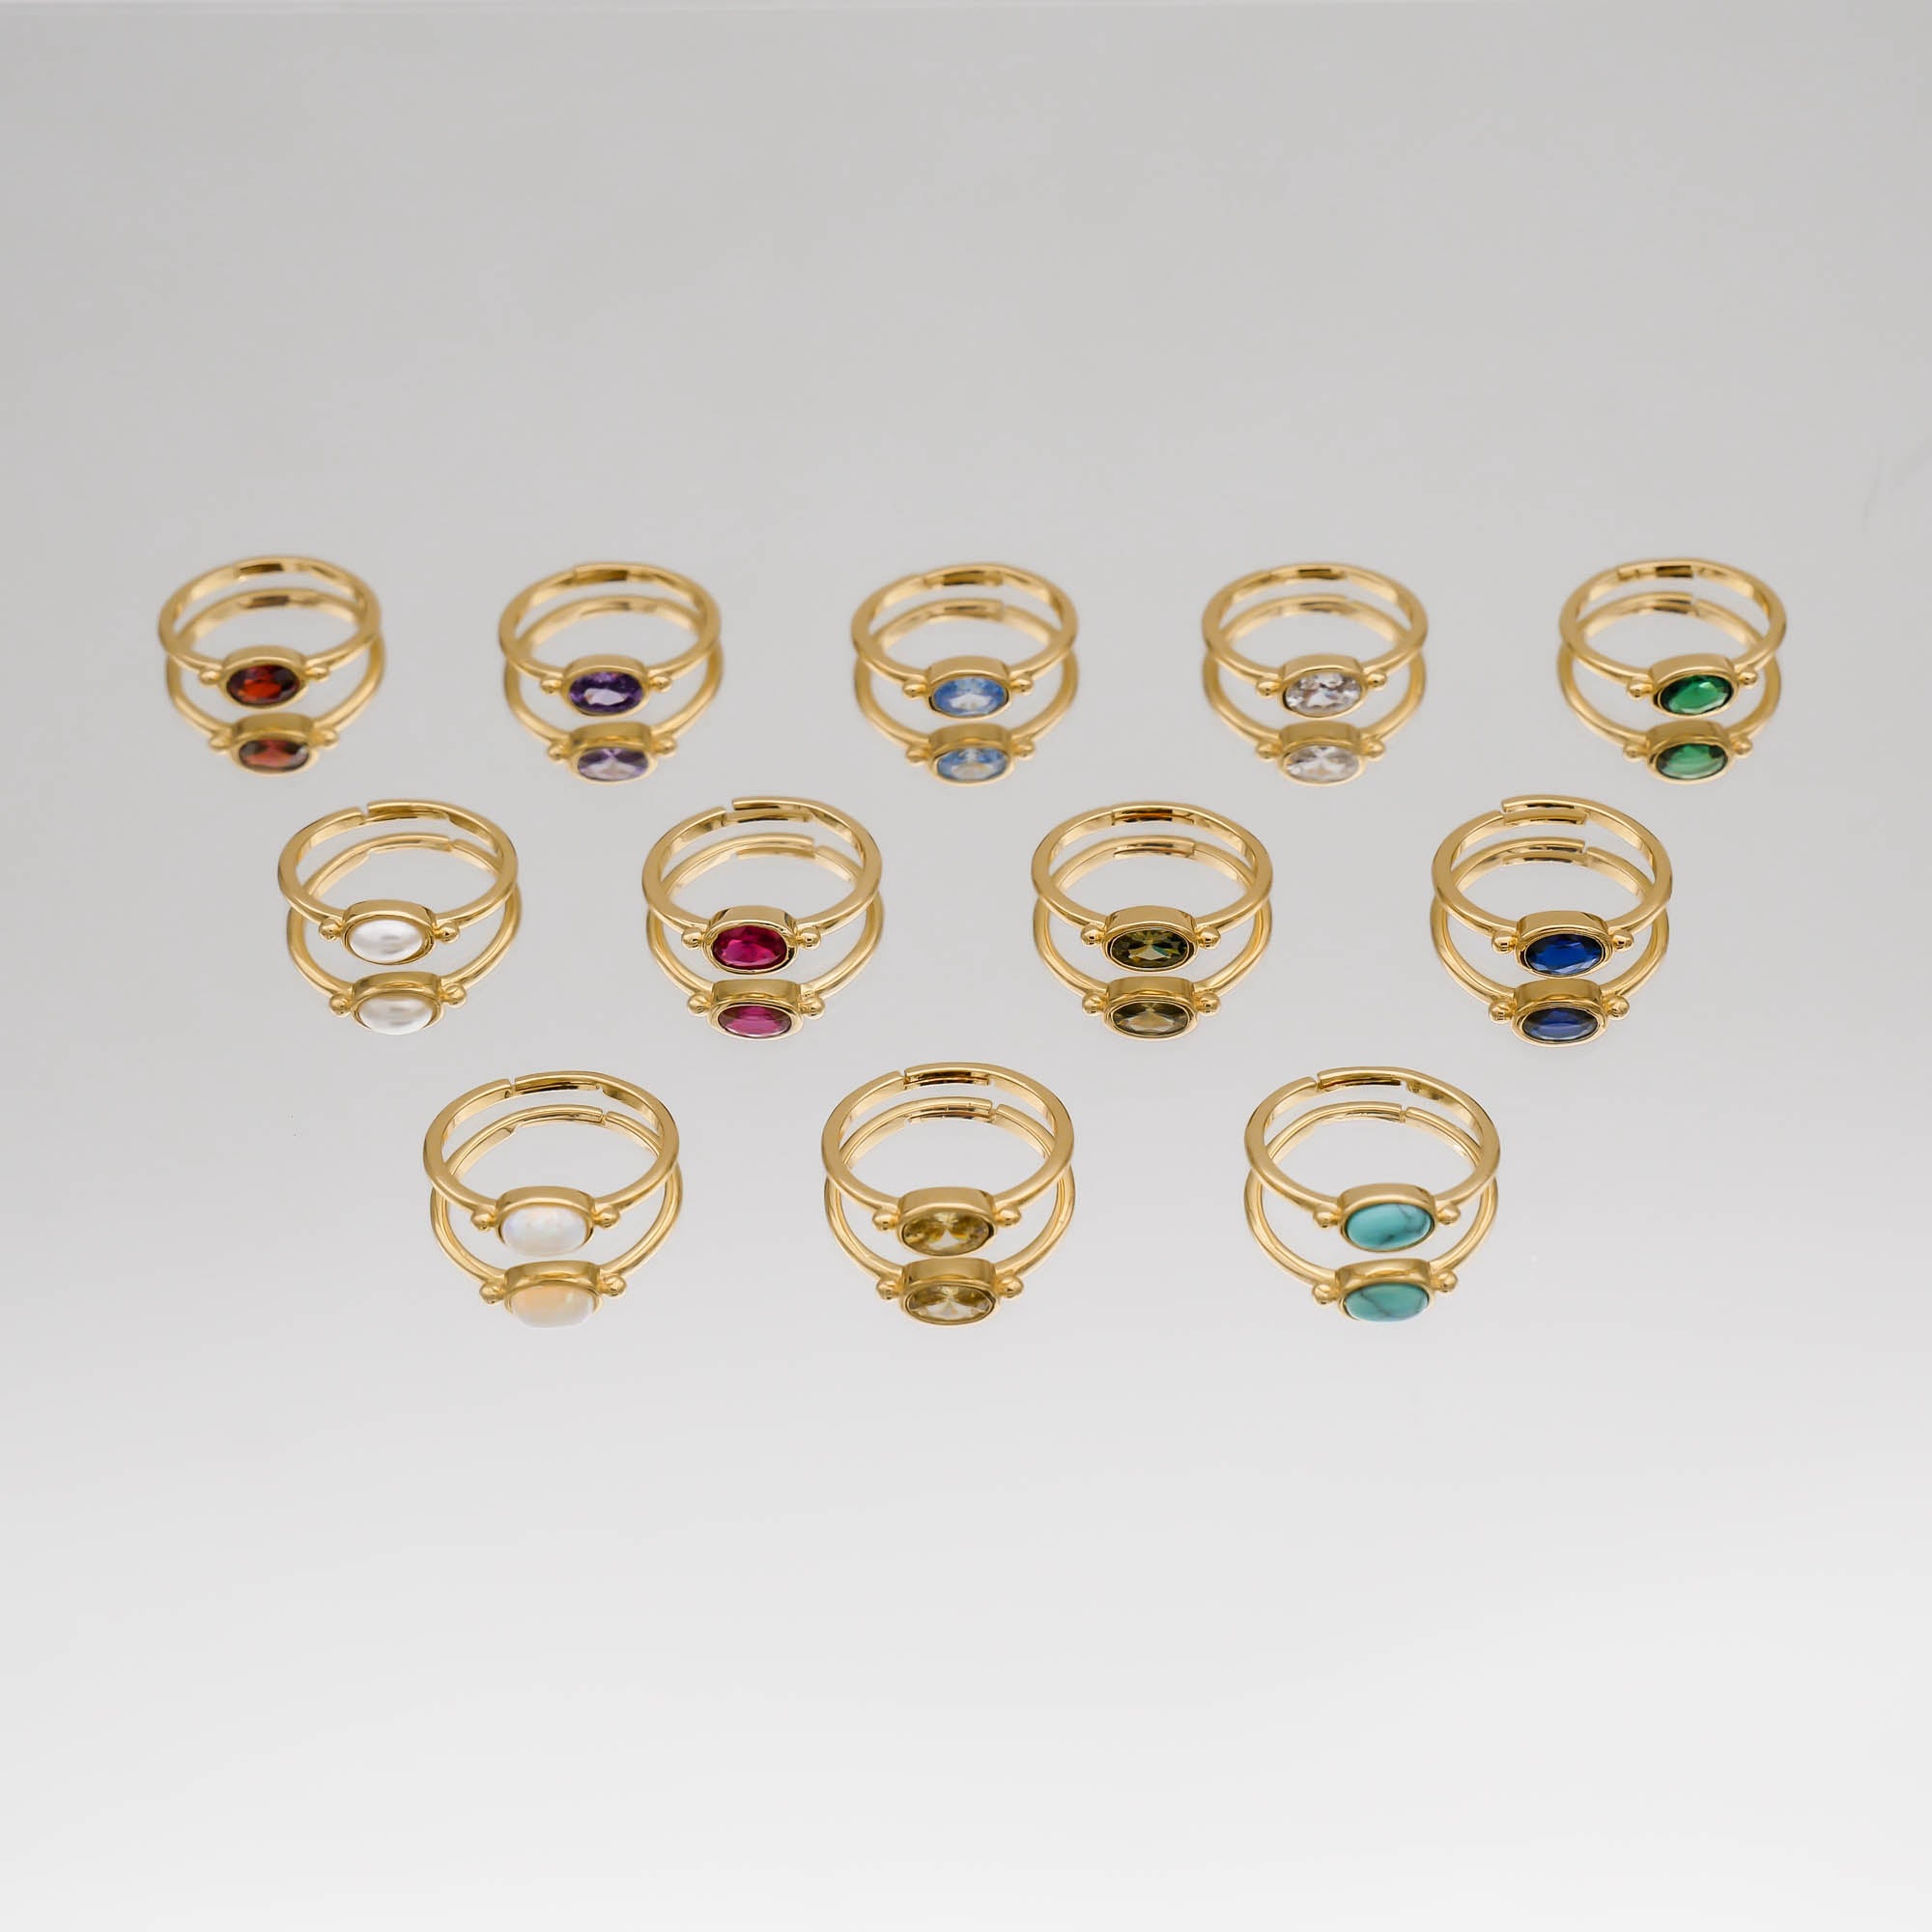 The birthstone jewellery collection of birthstone rings in gold